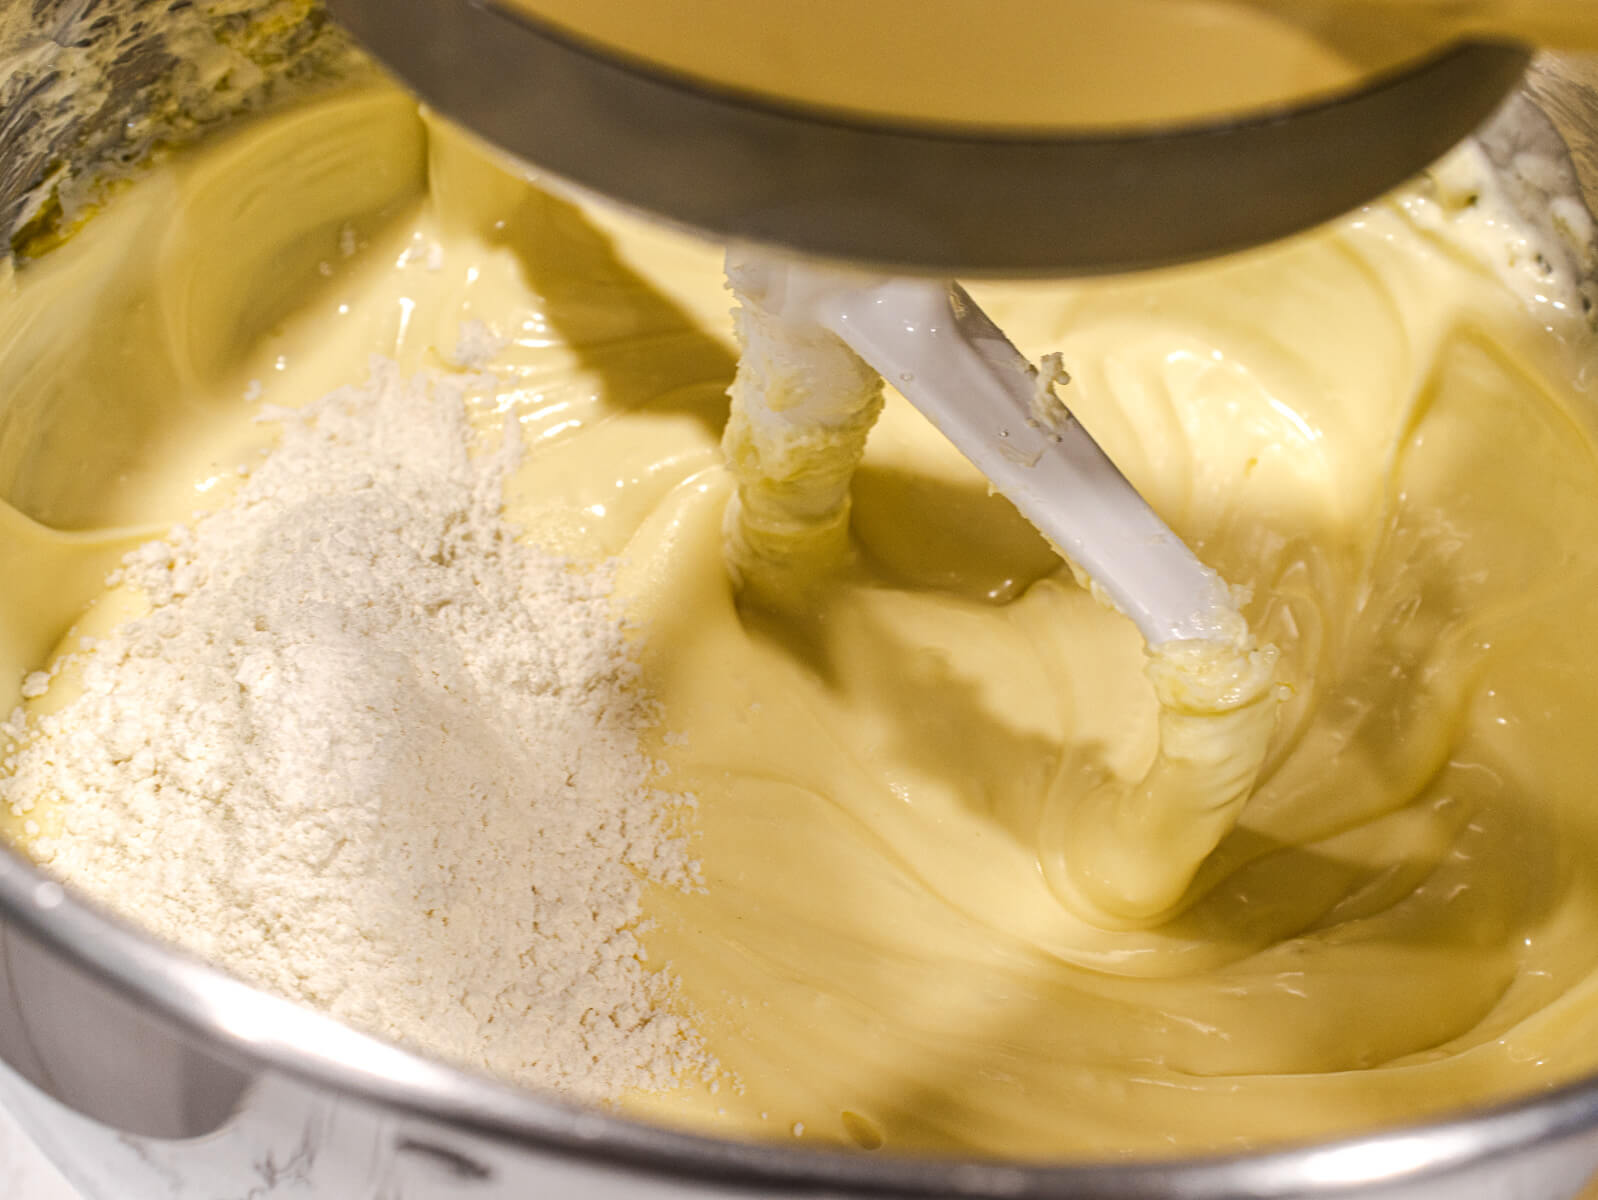 Cheesecake batter being mixed in a stand mixer.